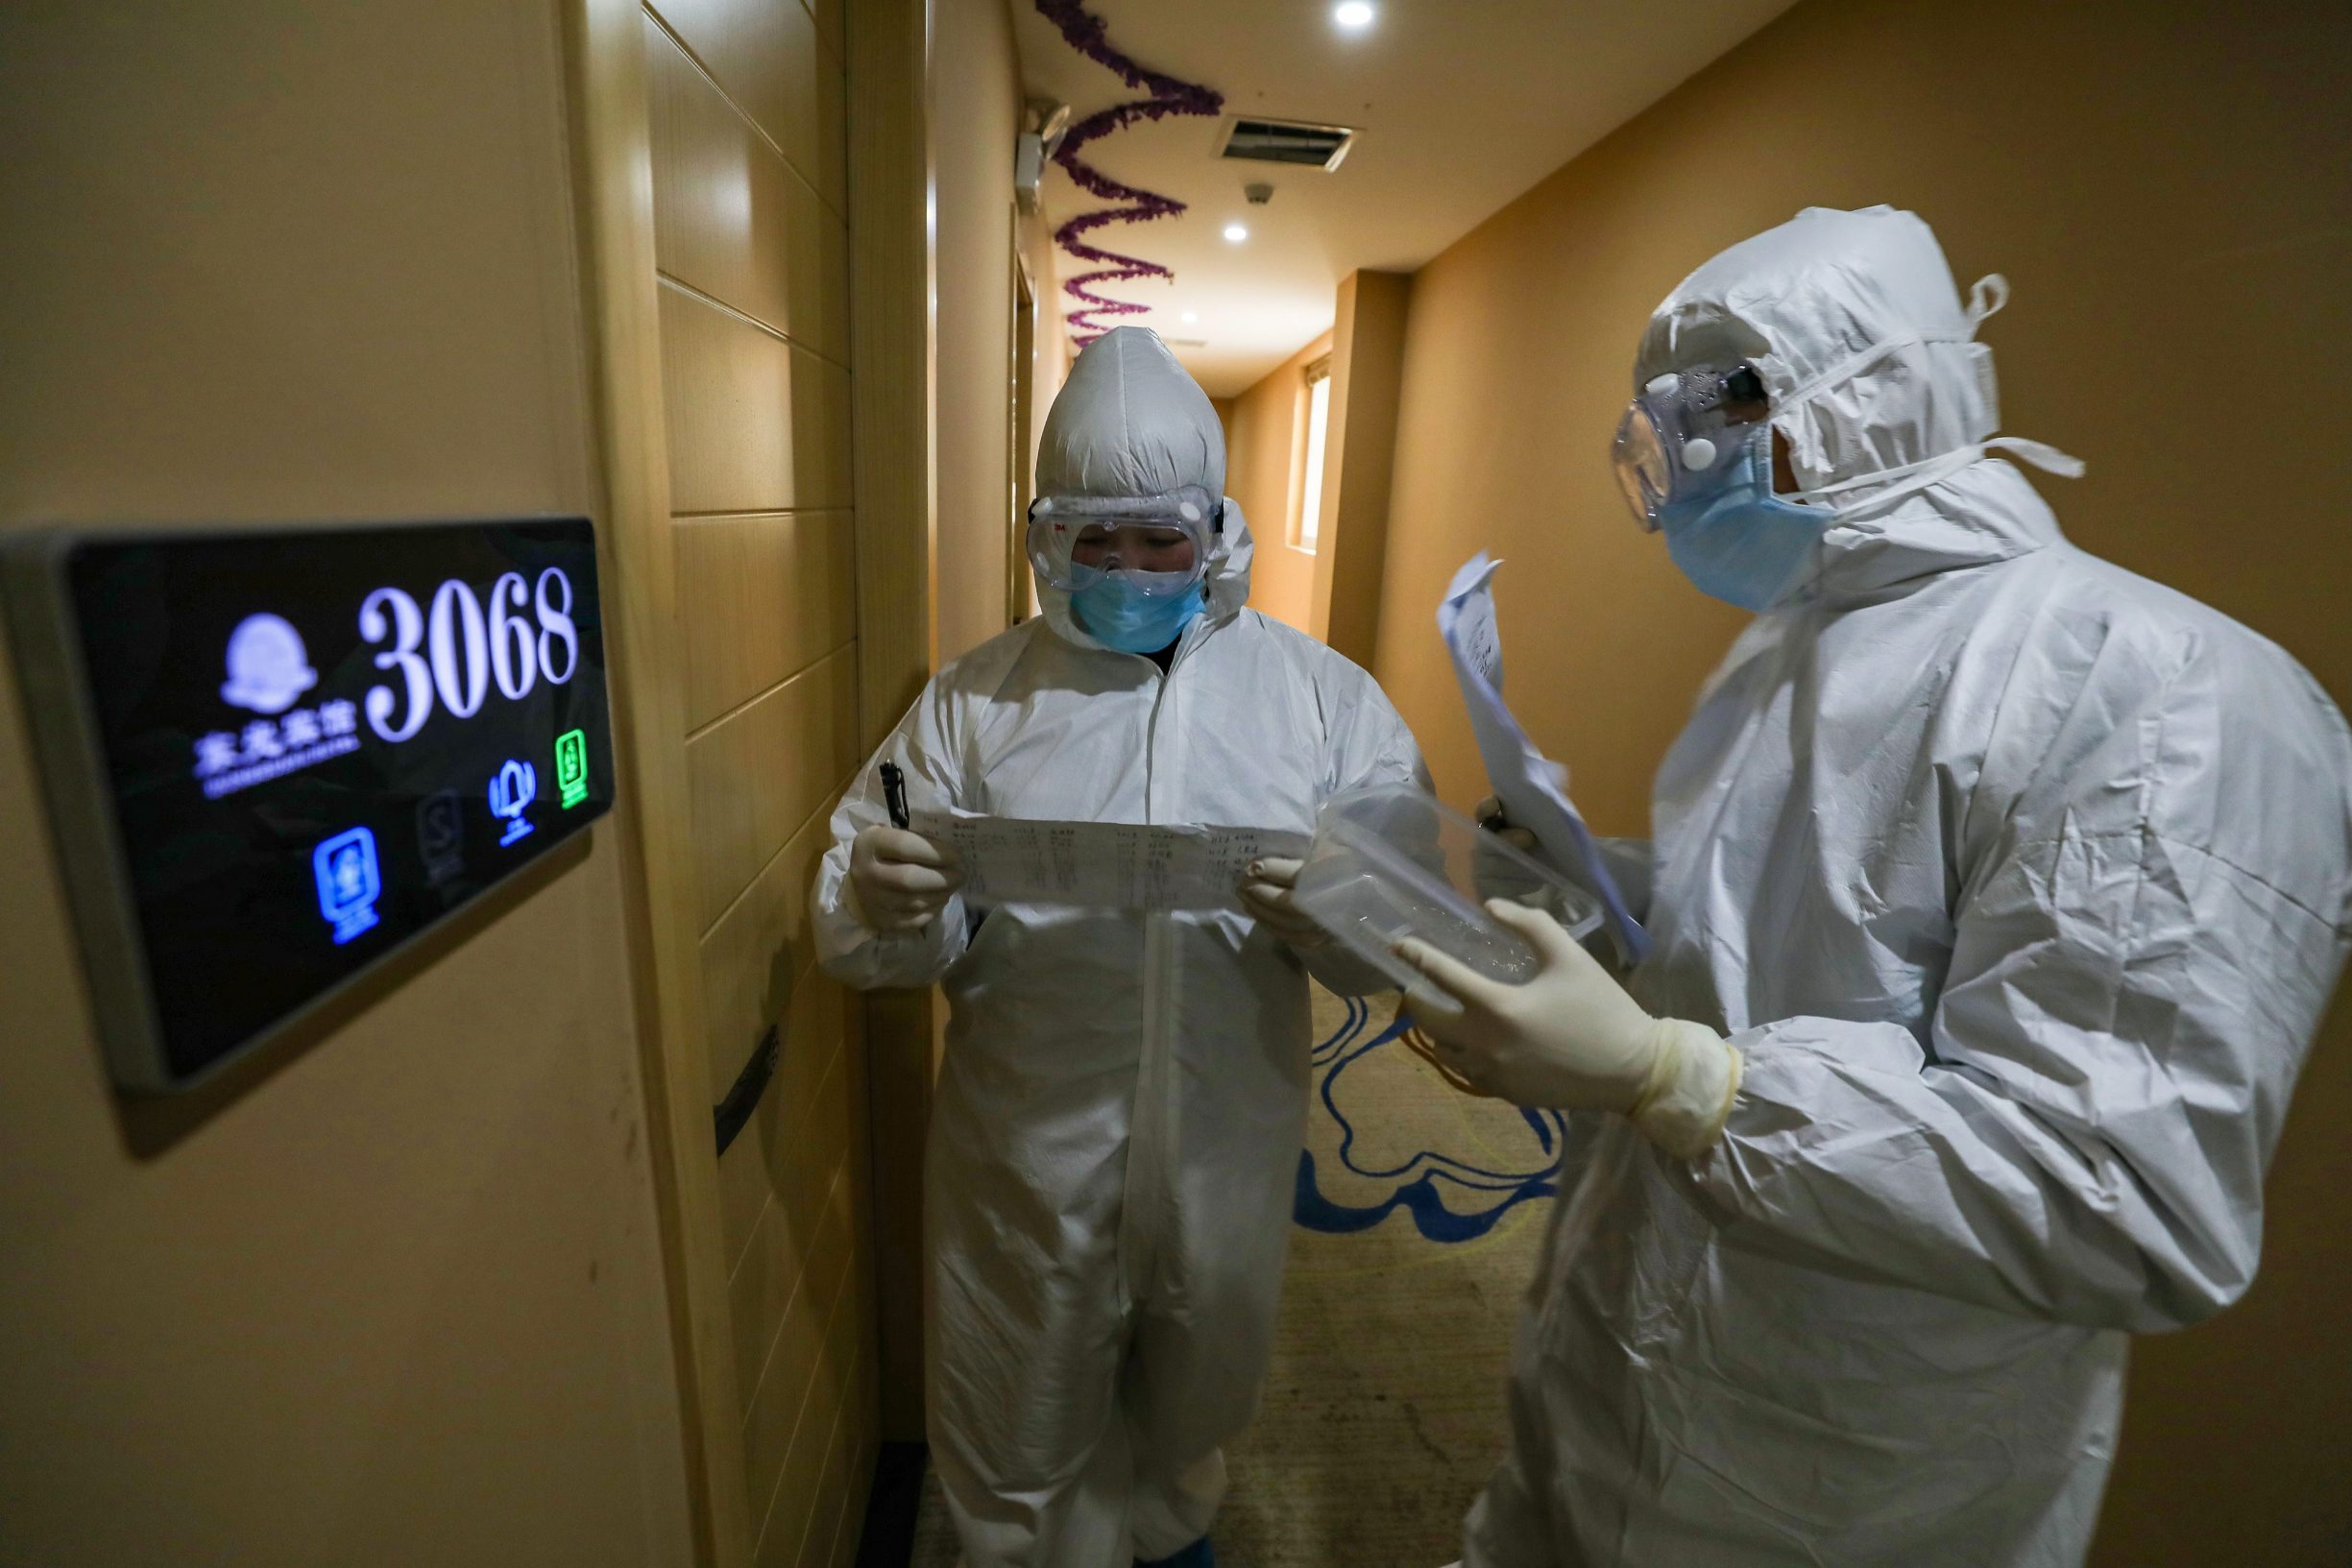 This photo taken on February 3, 2020 shows medical staff members on their rounds at a quarantine zone in Wuhan, the epicentre of the new coronavirus outbreak, in China's central Hubei province. - The number of total infections in China's coronavirus outbreak has passed 20,400 nationwide with 3,235 new cases confirmed, the National Health Commission said on February 4. (Photo by STR / AFP) / China OUT